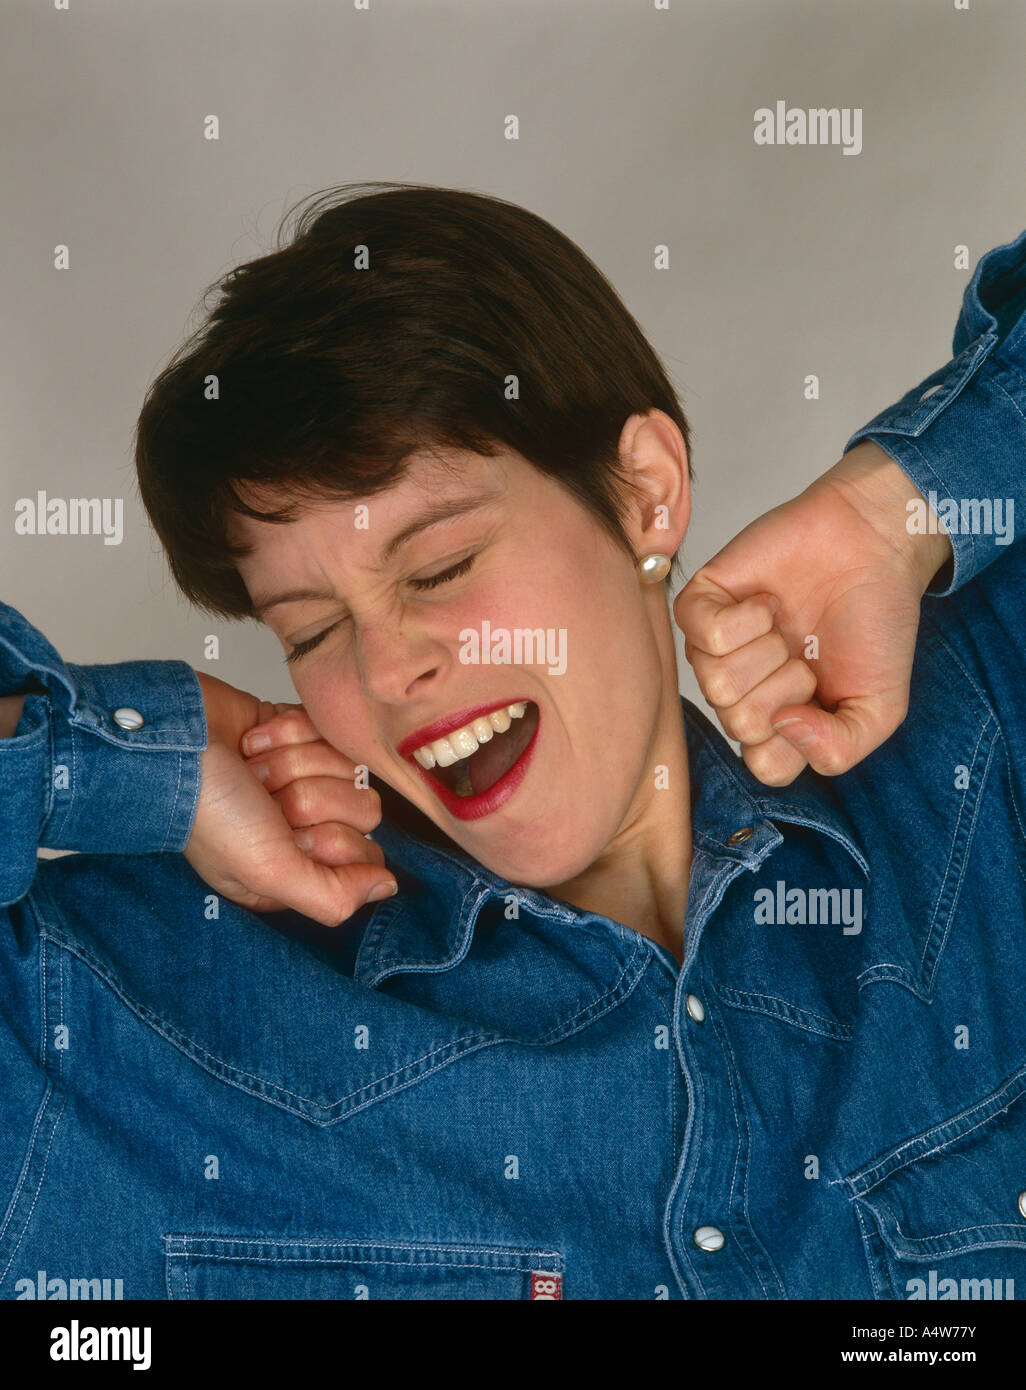 A GIRL IN BLUE SHIRT STRETCHING AND YAWNING Stock Photo